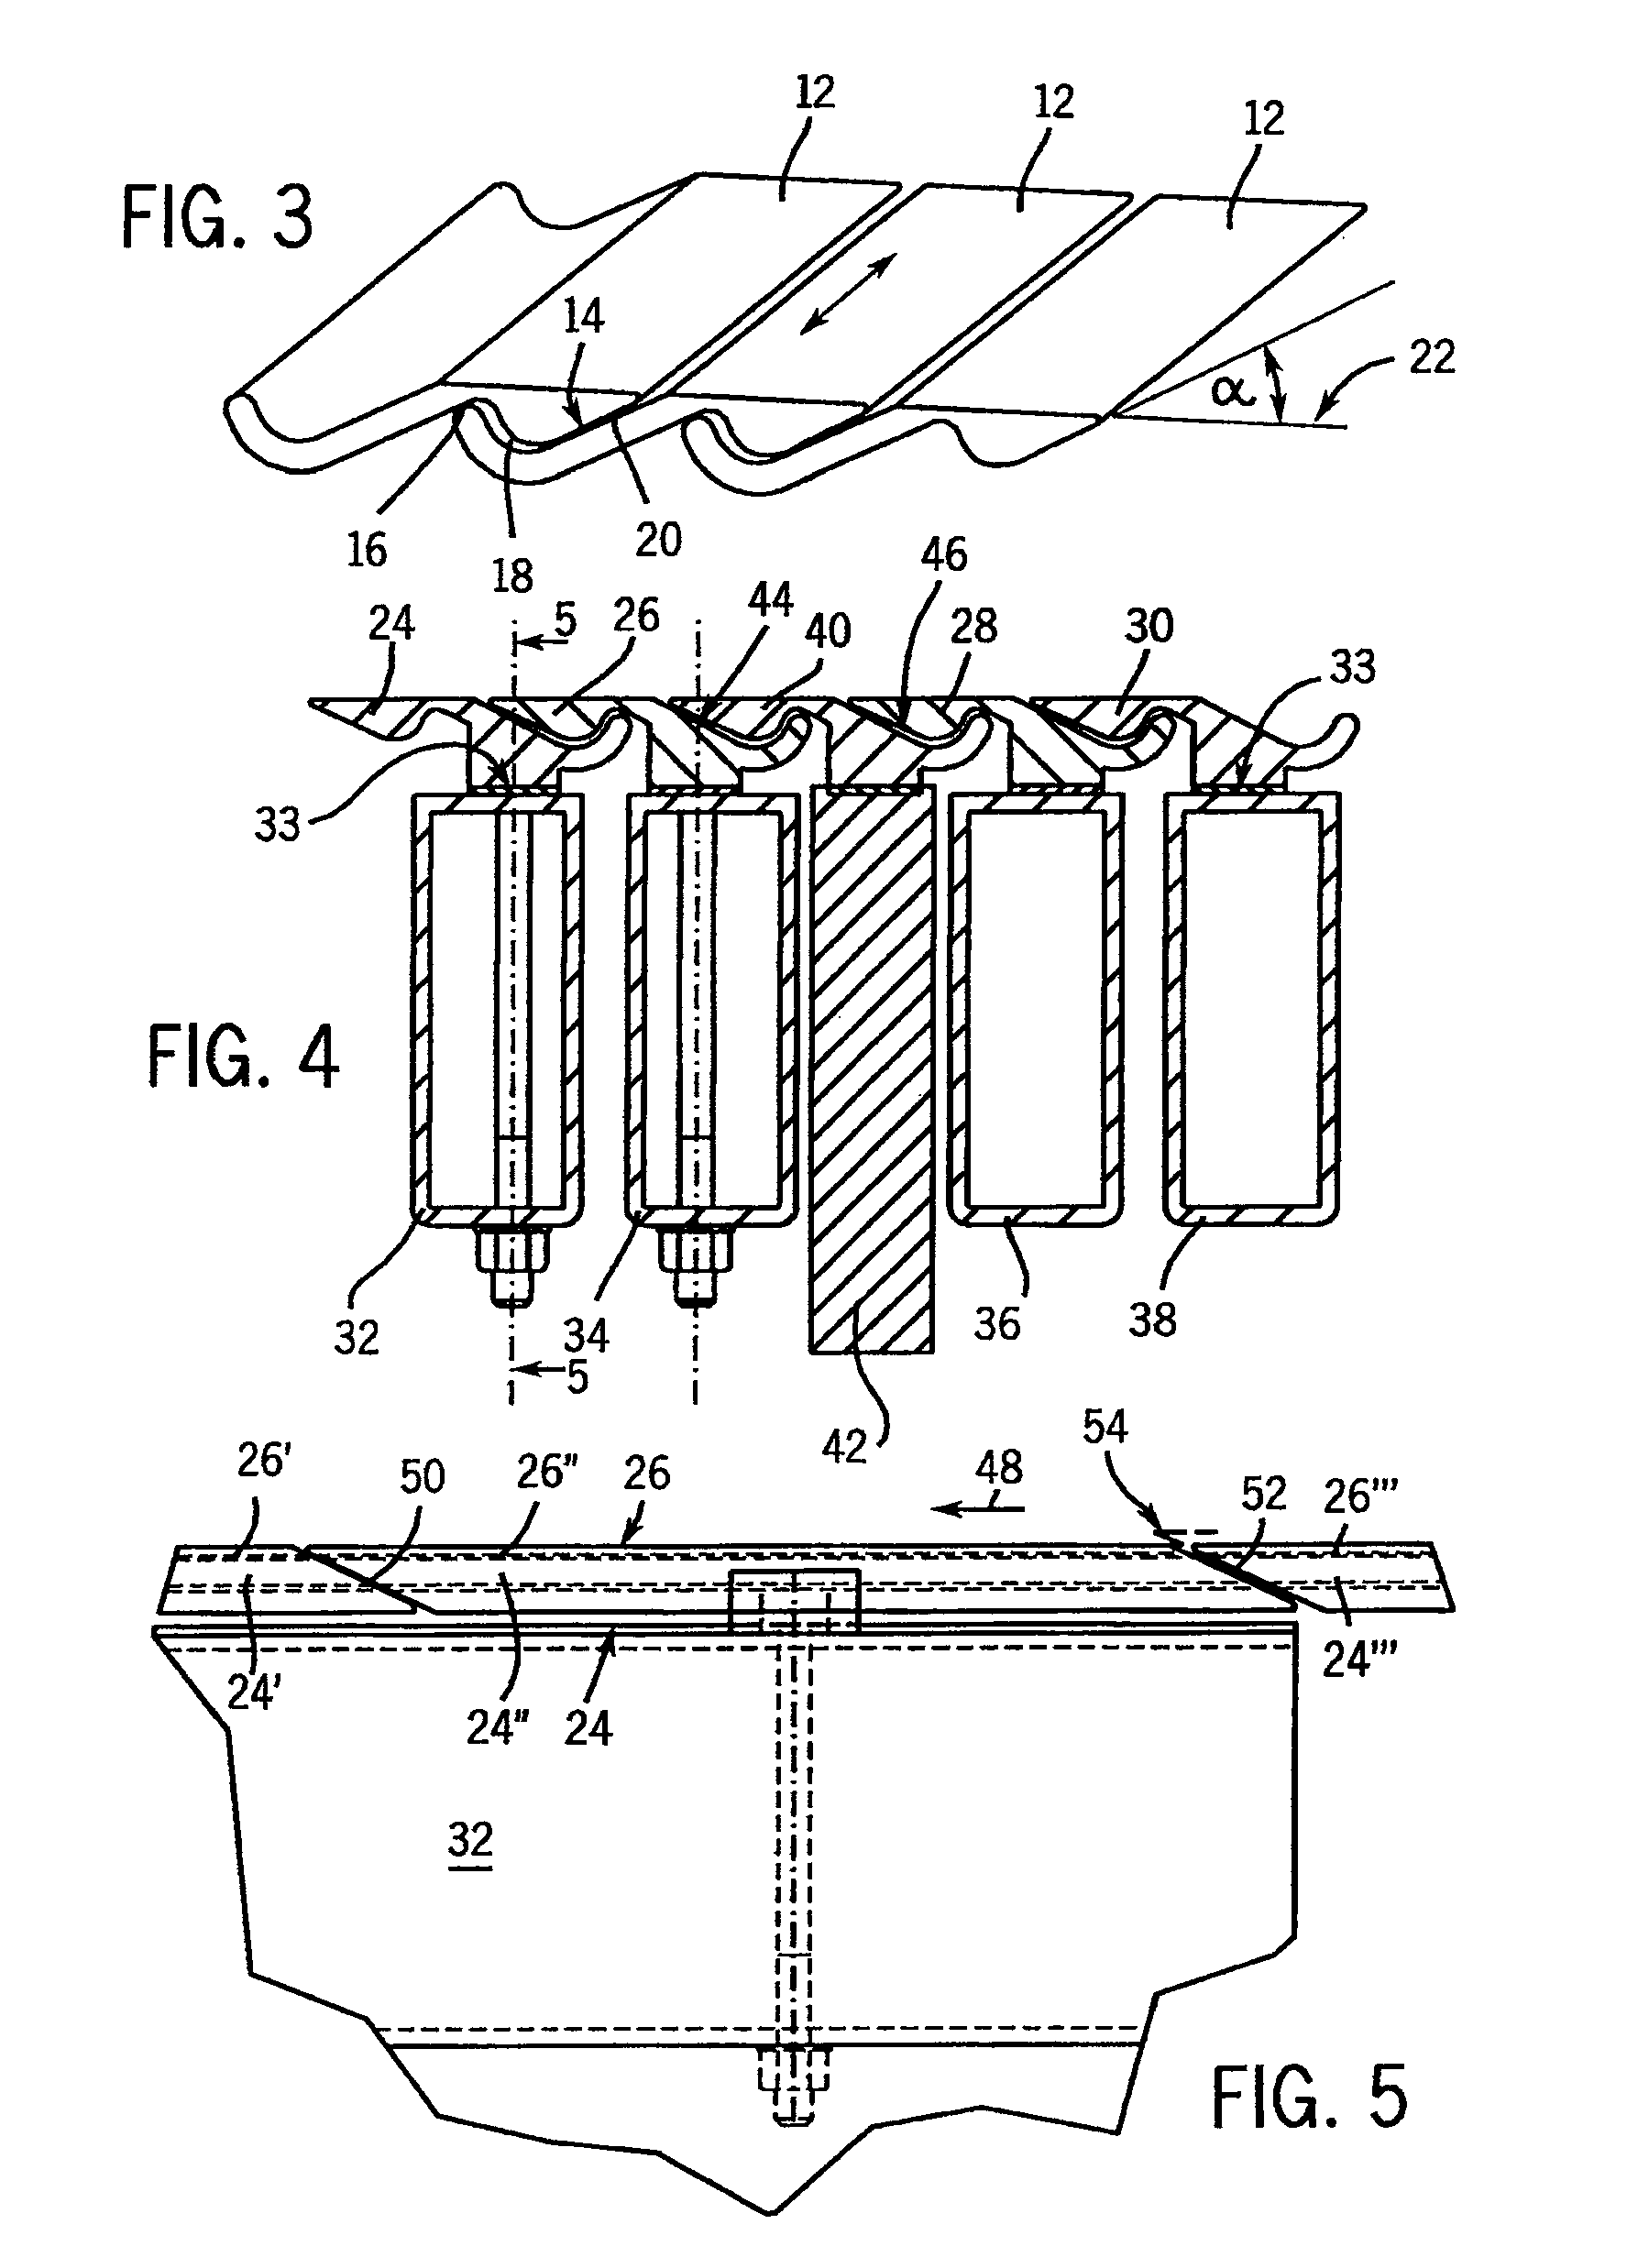 Method and device for cooling a layer of bulk material on a conveyor grate